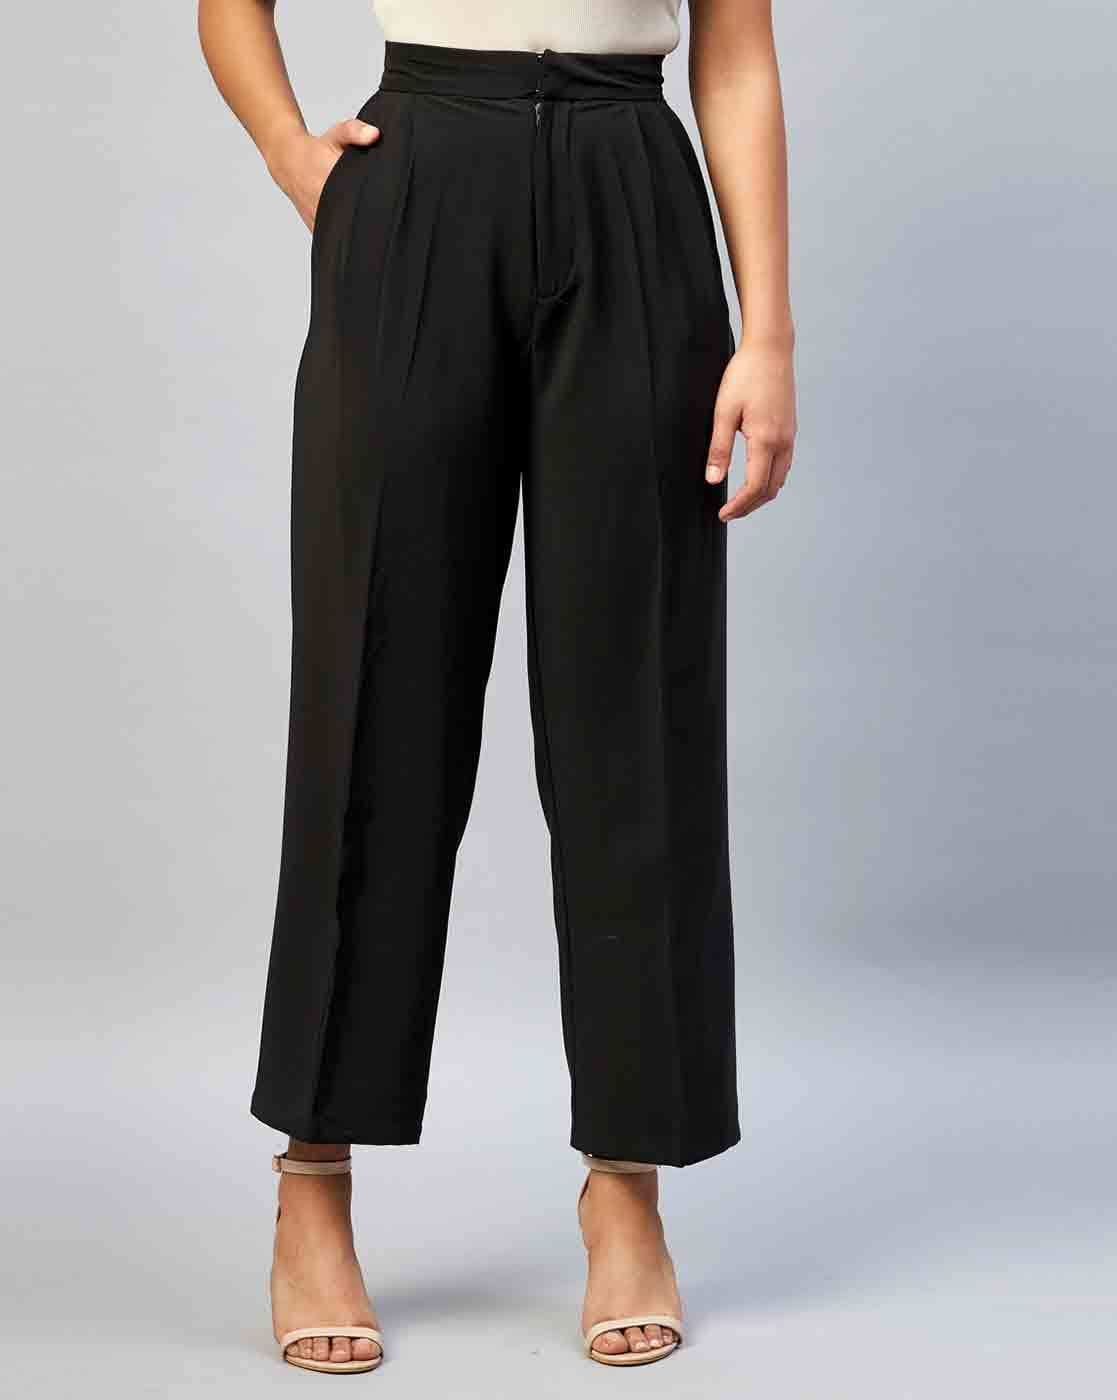 Petite Camel High Waist Pleated Wide Leg Trousers | New Look